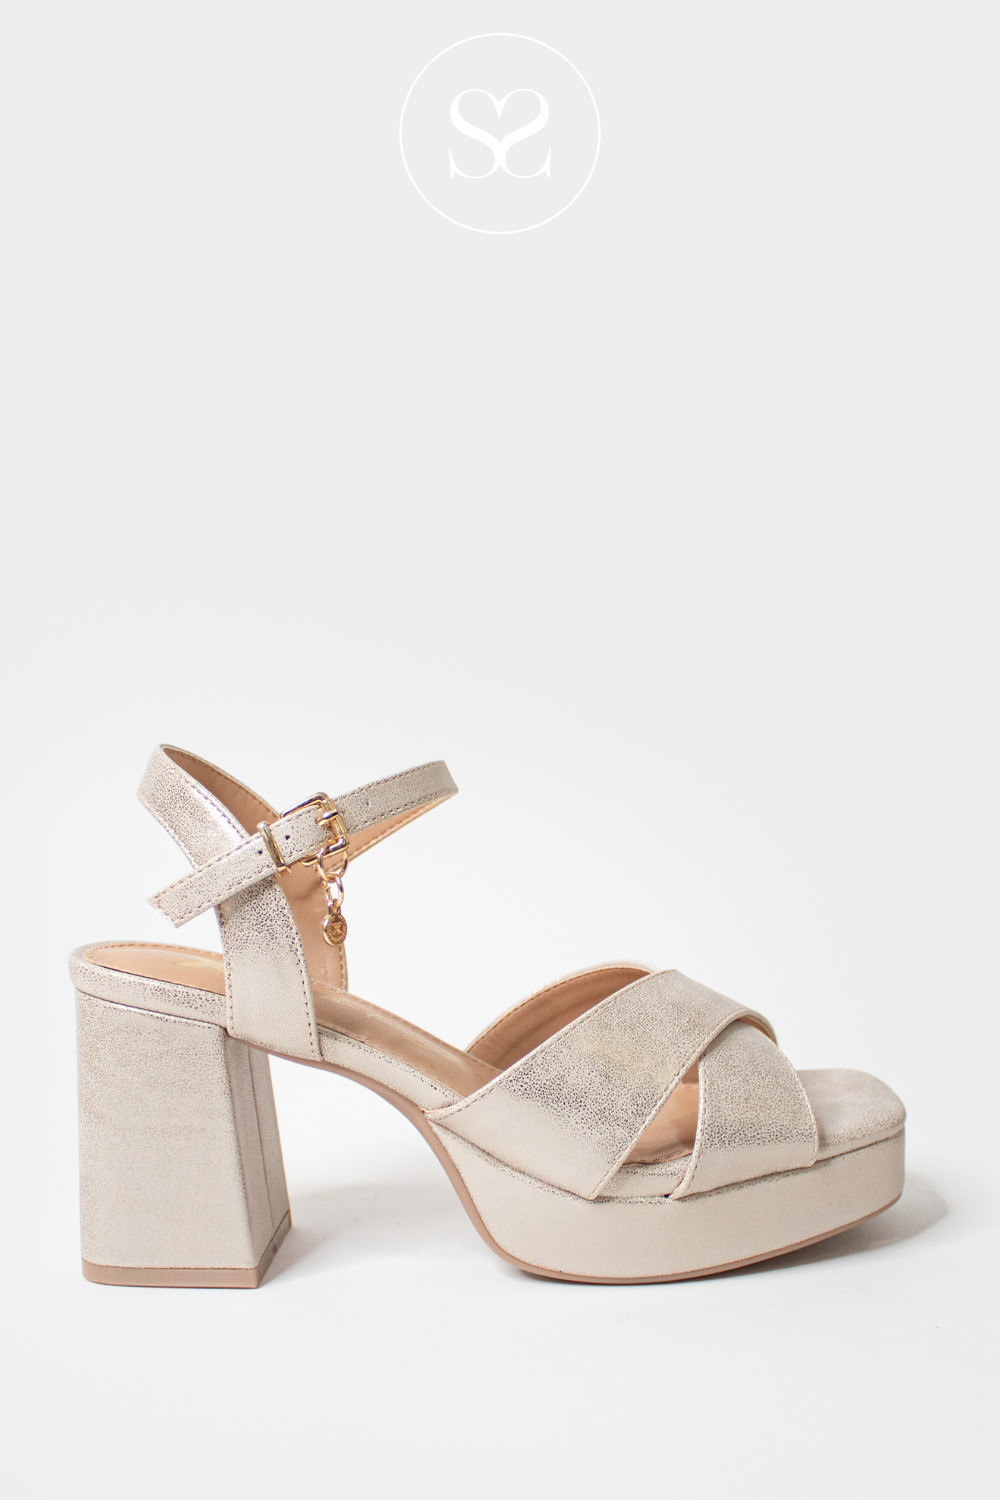 XTI 142357 GOLD PLATFORM SOLE BLOCK HEEL OPEN TOE SANDALS WITH CRISS CROSS STRAPS AND AN ADJUSTABLE ANKLE STRAP